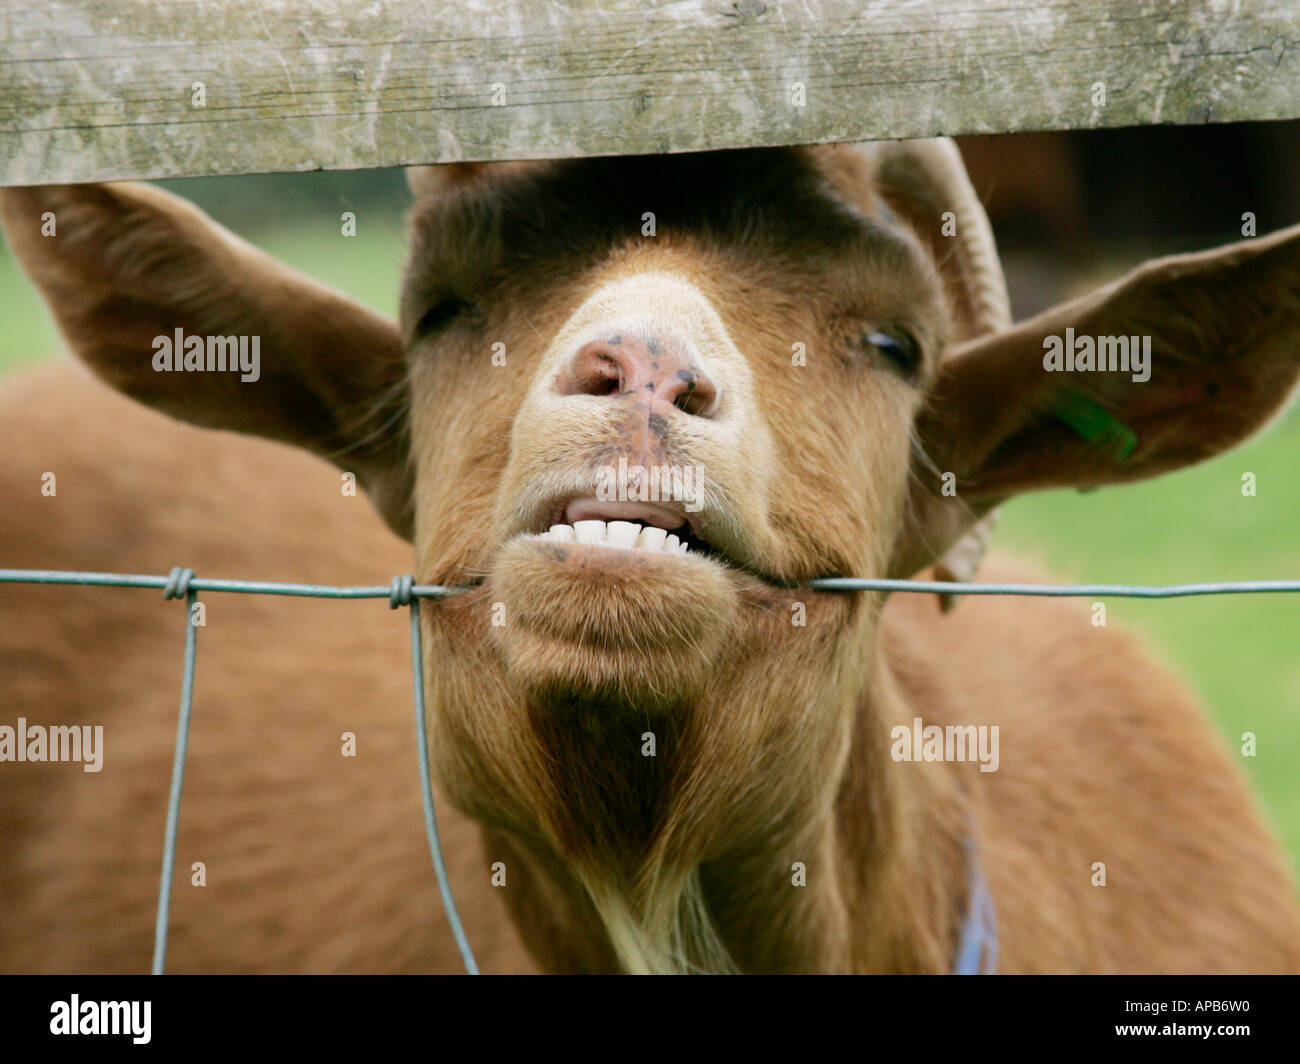 A brown goat chewing on a wire fence. Stock Photo